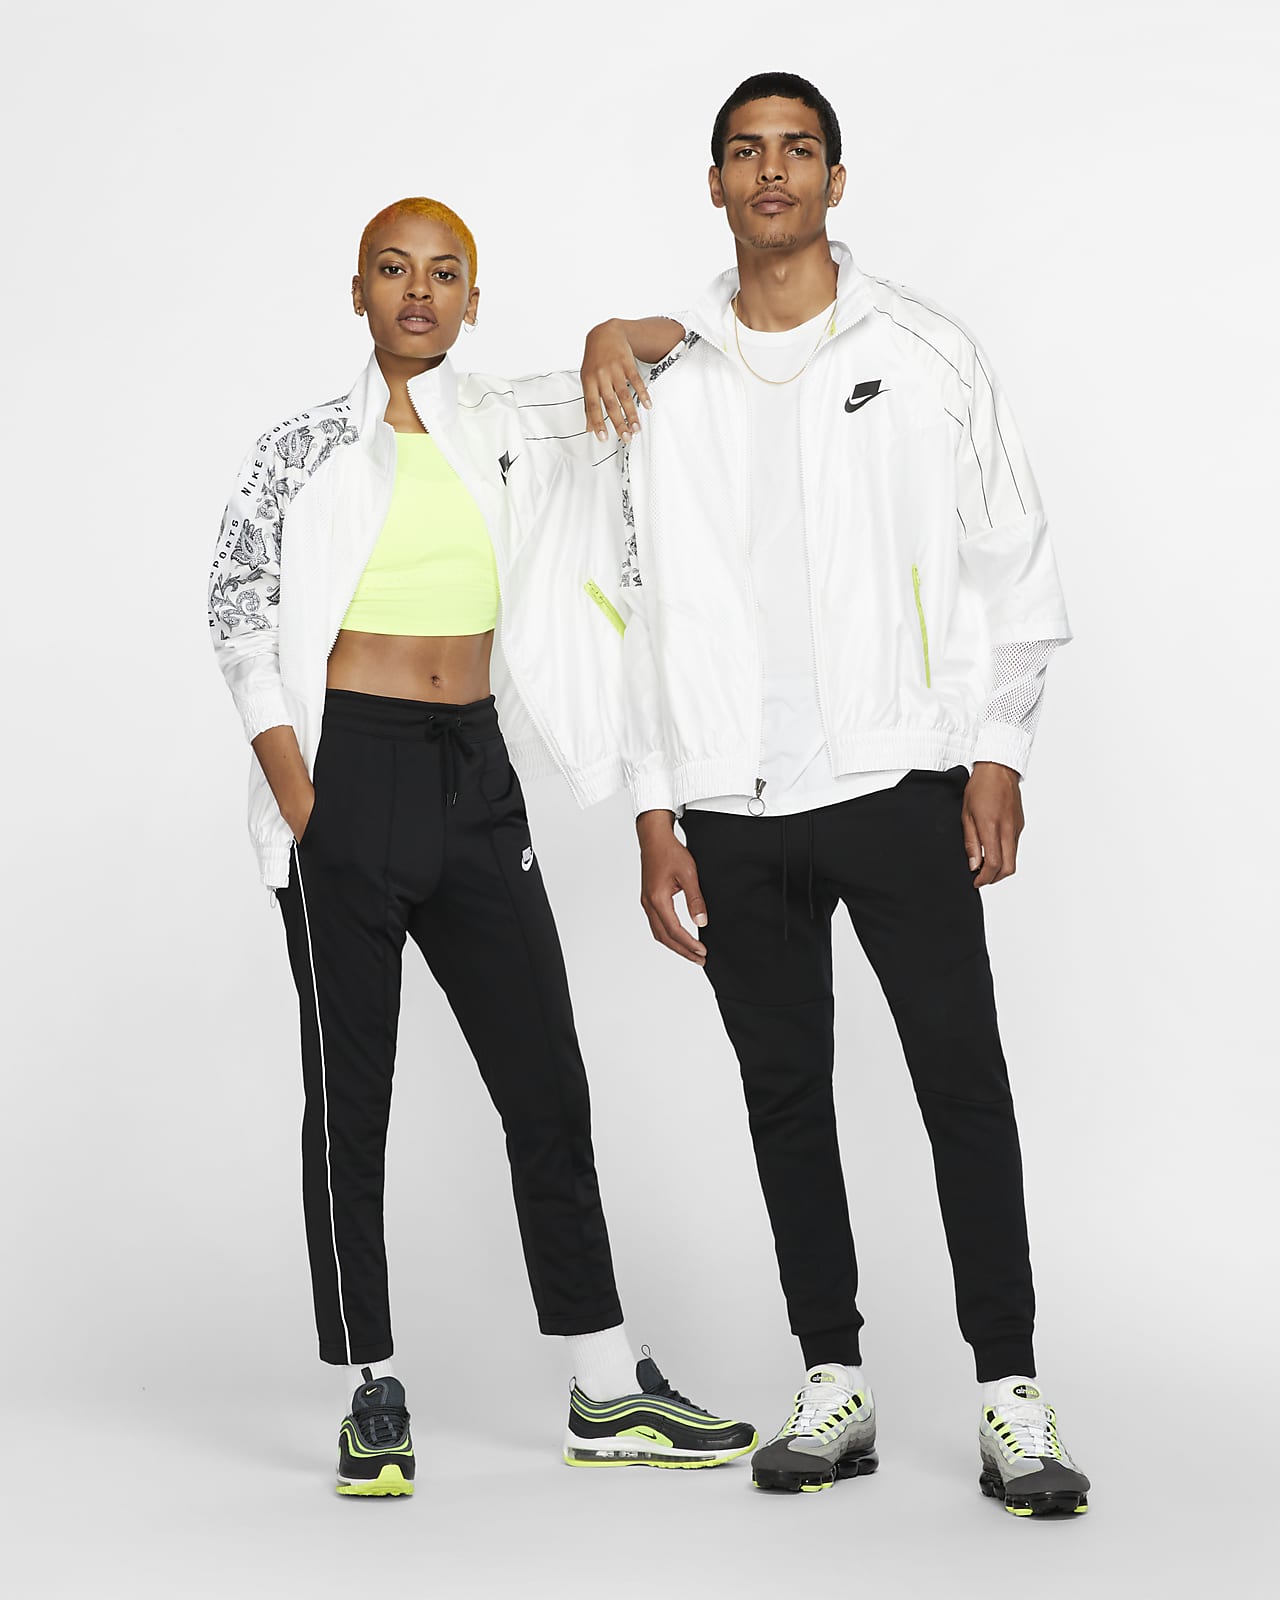 Sportswear - This Online Shop Is Our New Go To For Affordable ...